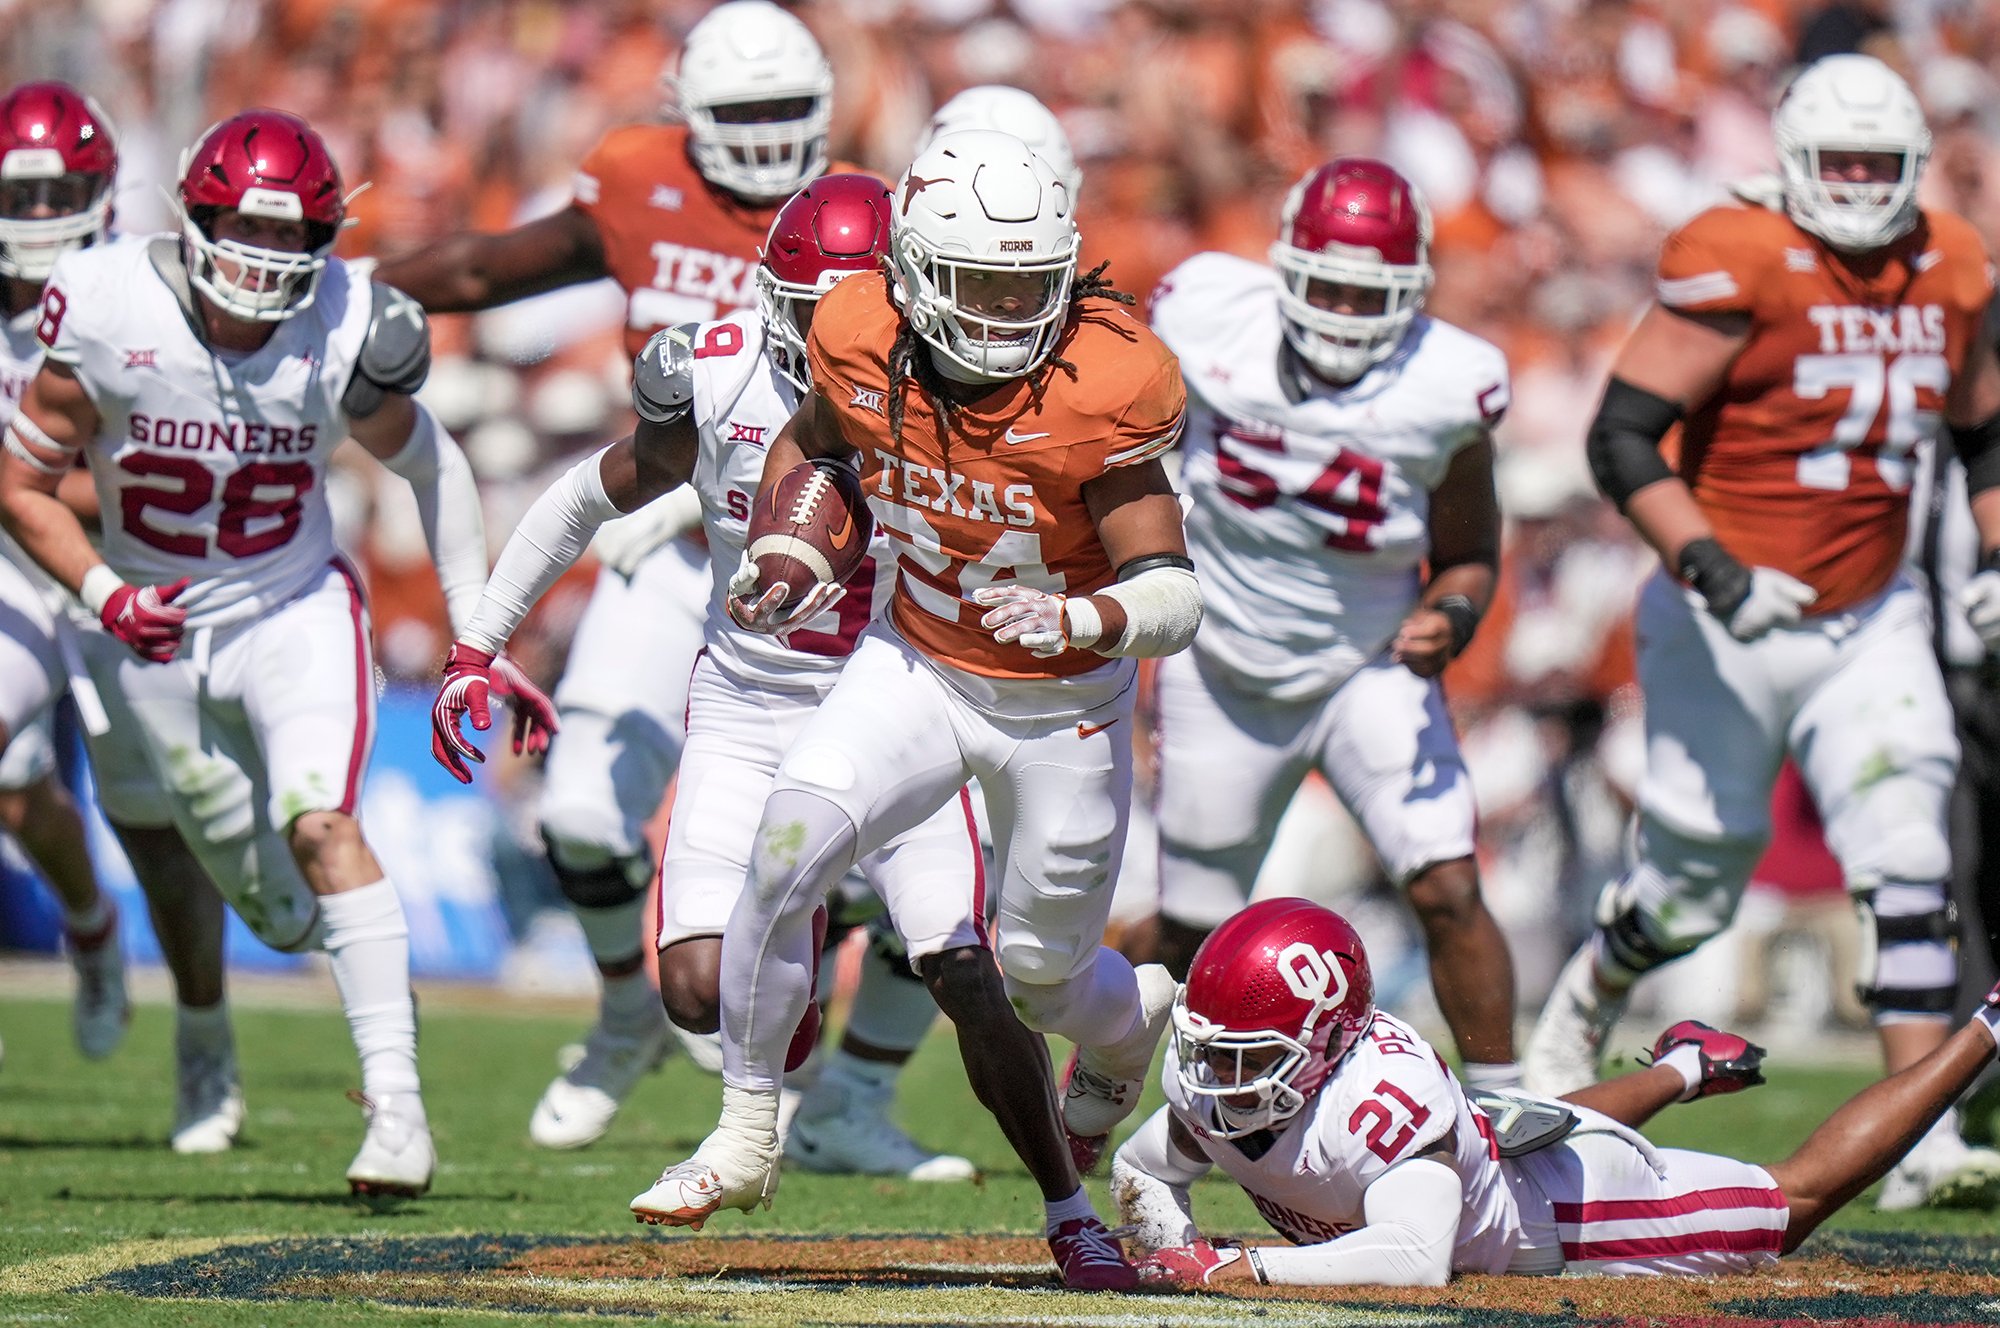 Texas Longhorns running back Jonathon Brooks (24) picks up a first down against the Oklahoma Sooners in the third quarter at the Cotton Bowl.